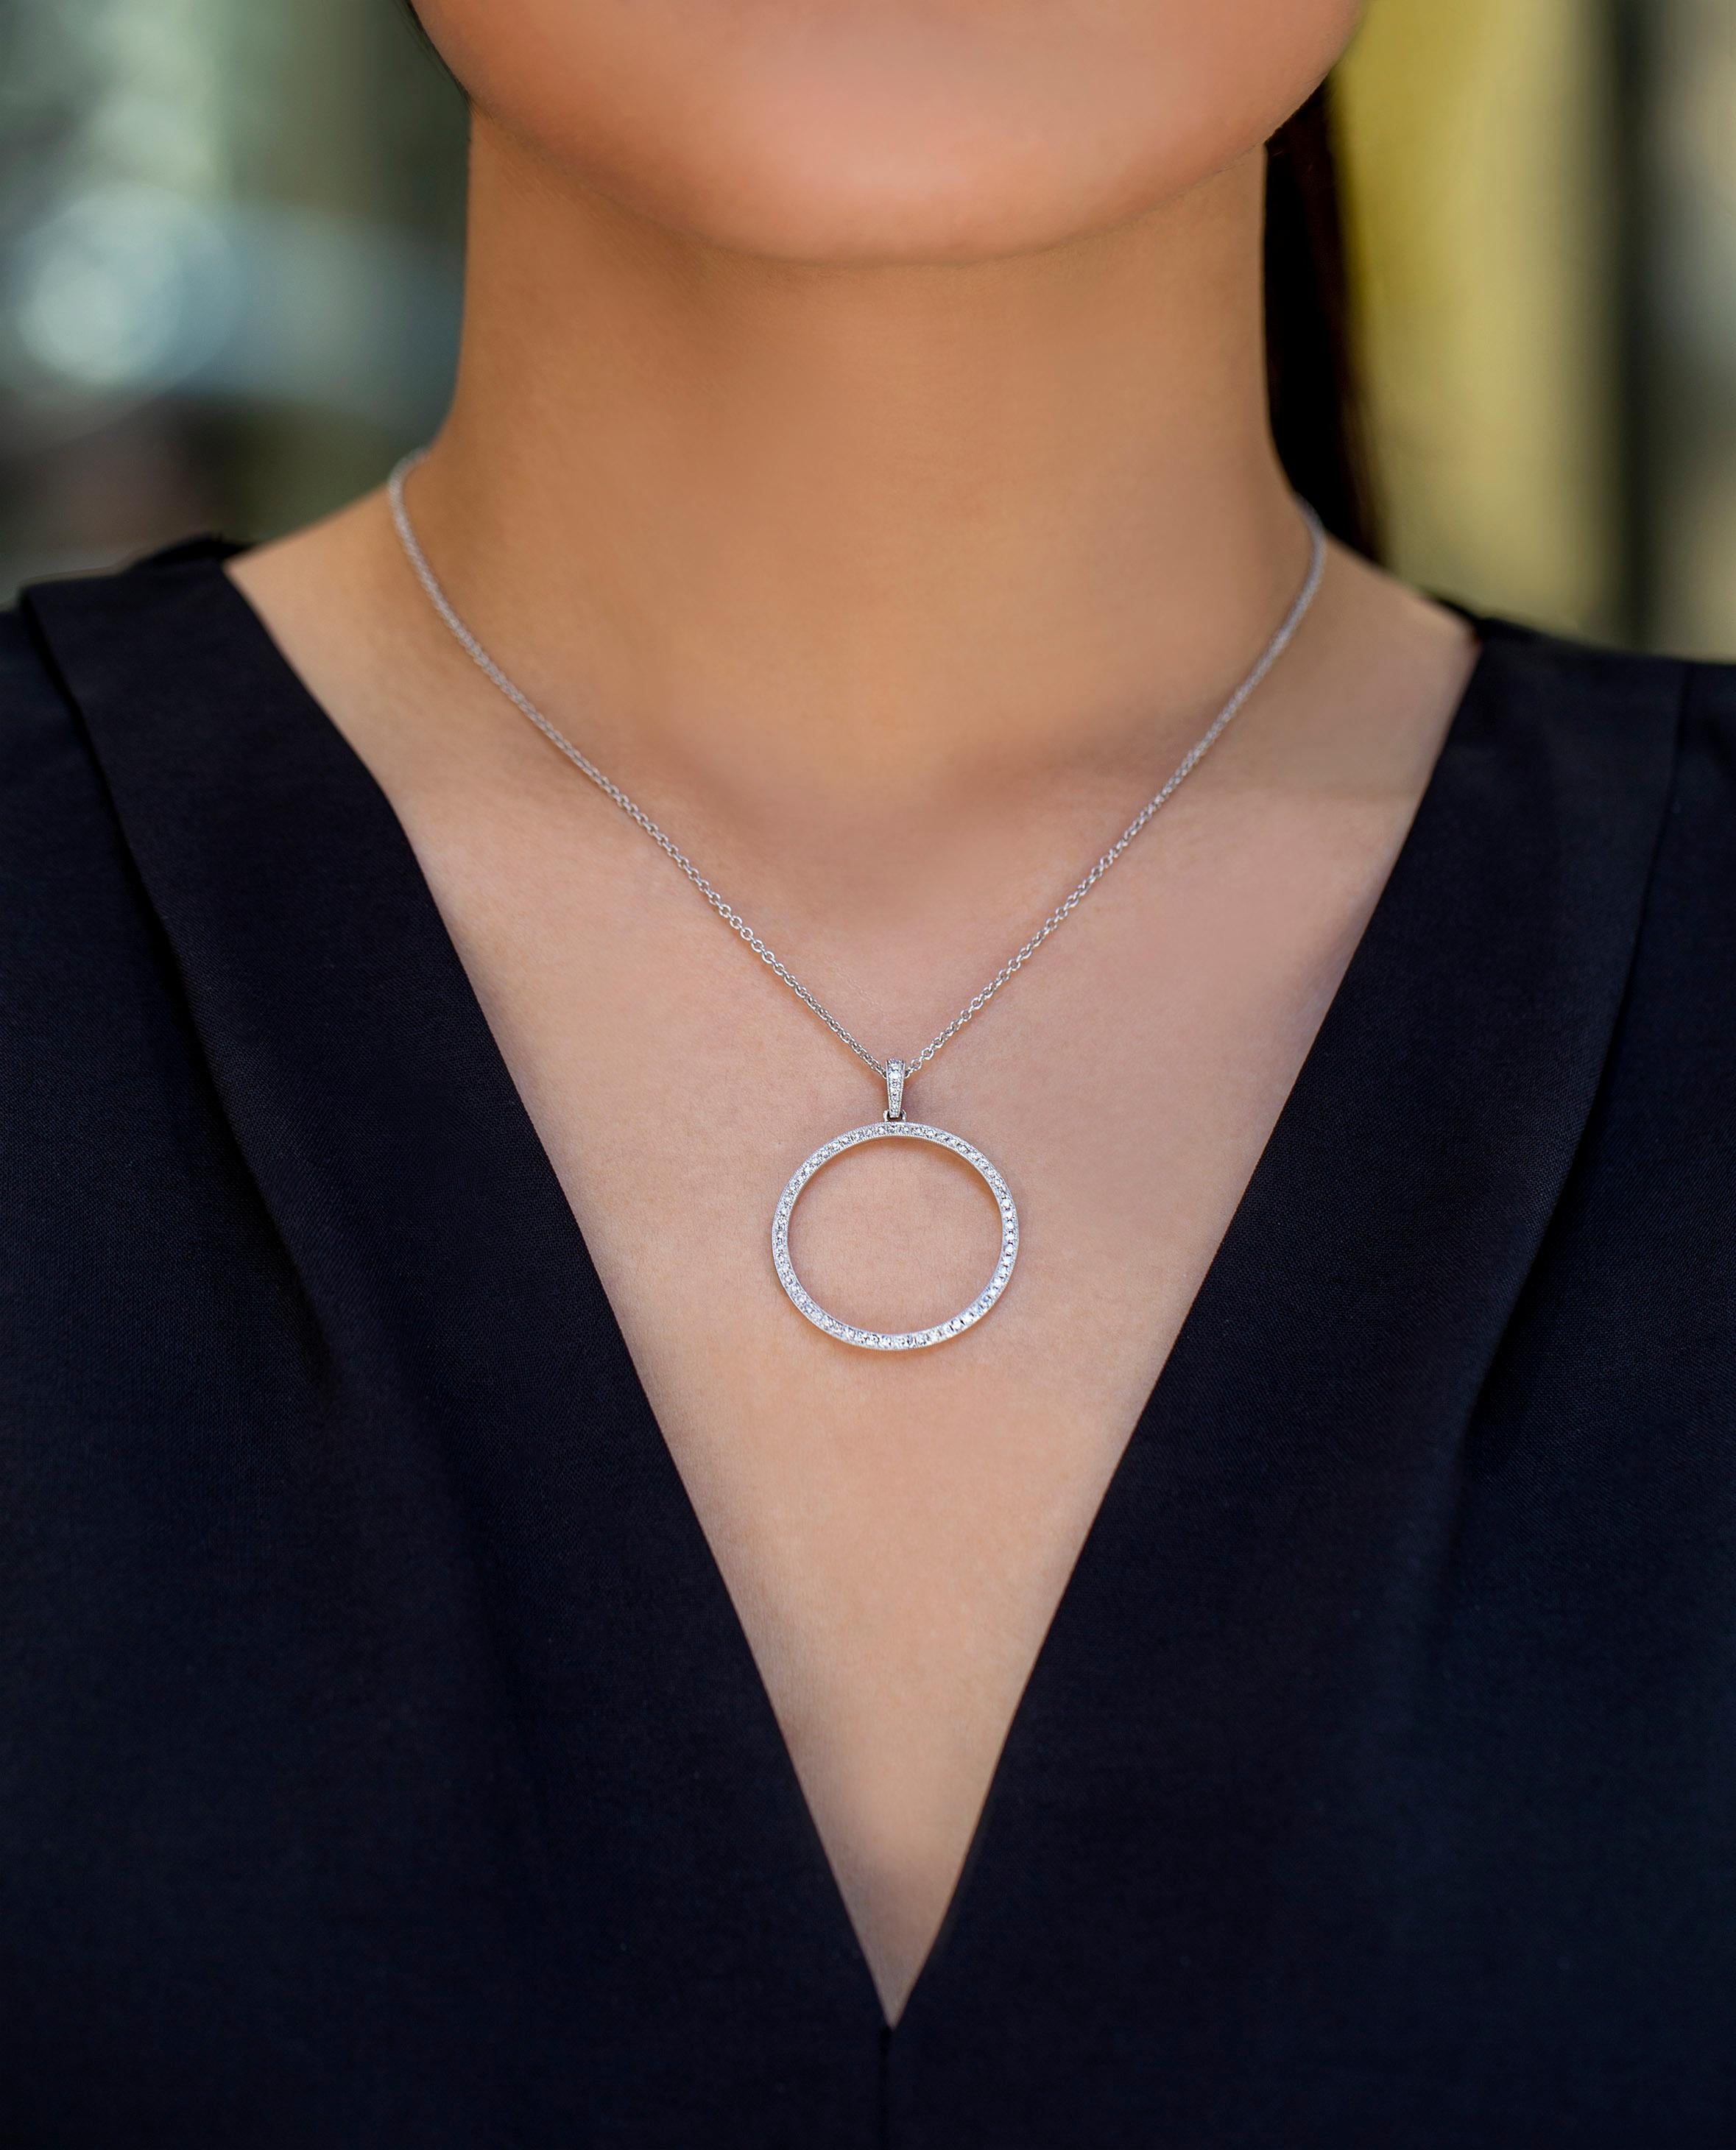 A simple pendant necklace showcasing a diamond encrusted circle pendant weighing 0.64 carats total, pave set with milgrain edges, with diamond encrusted bail. suspended on 18 inches white gold chain, Made in 18k White Gold.

Style available in